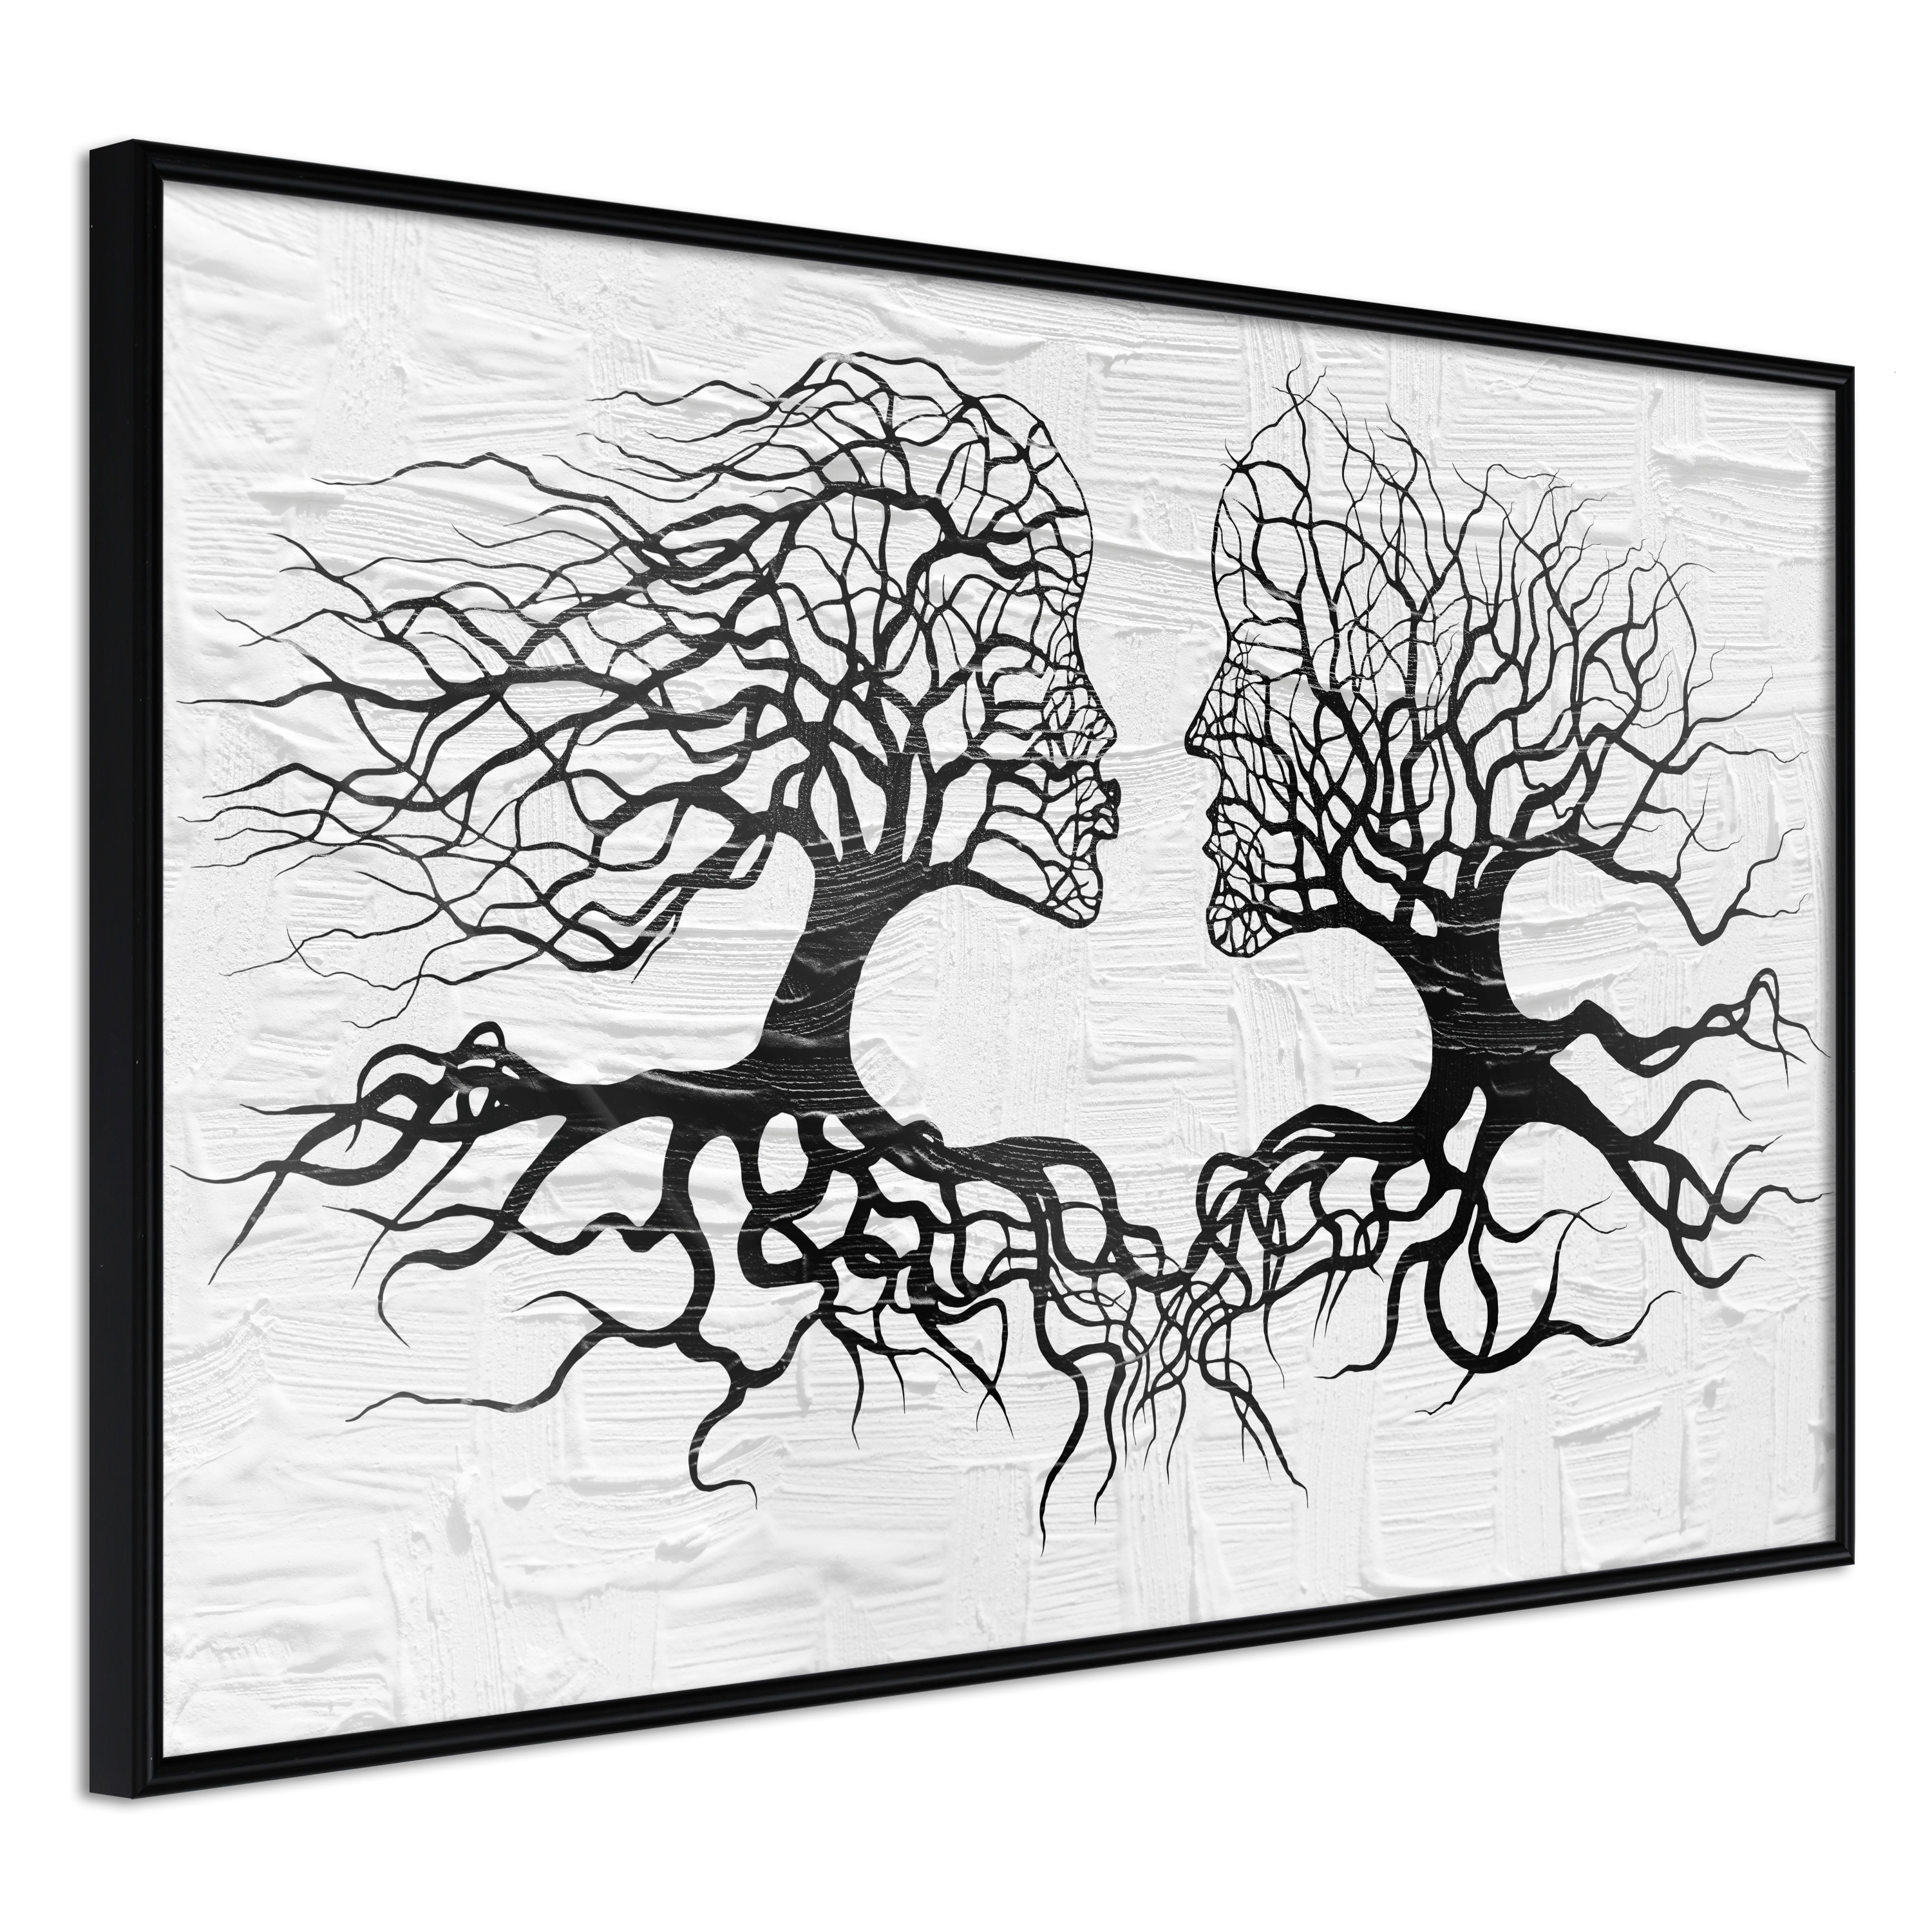 Poster - Like the Old Trees - 30x20